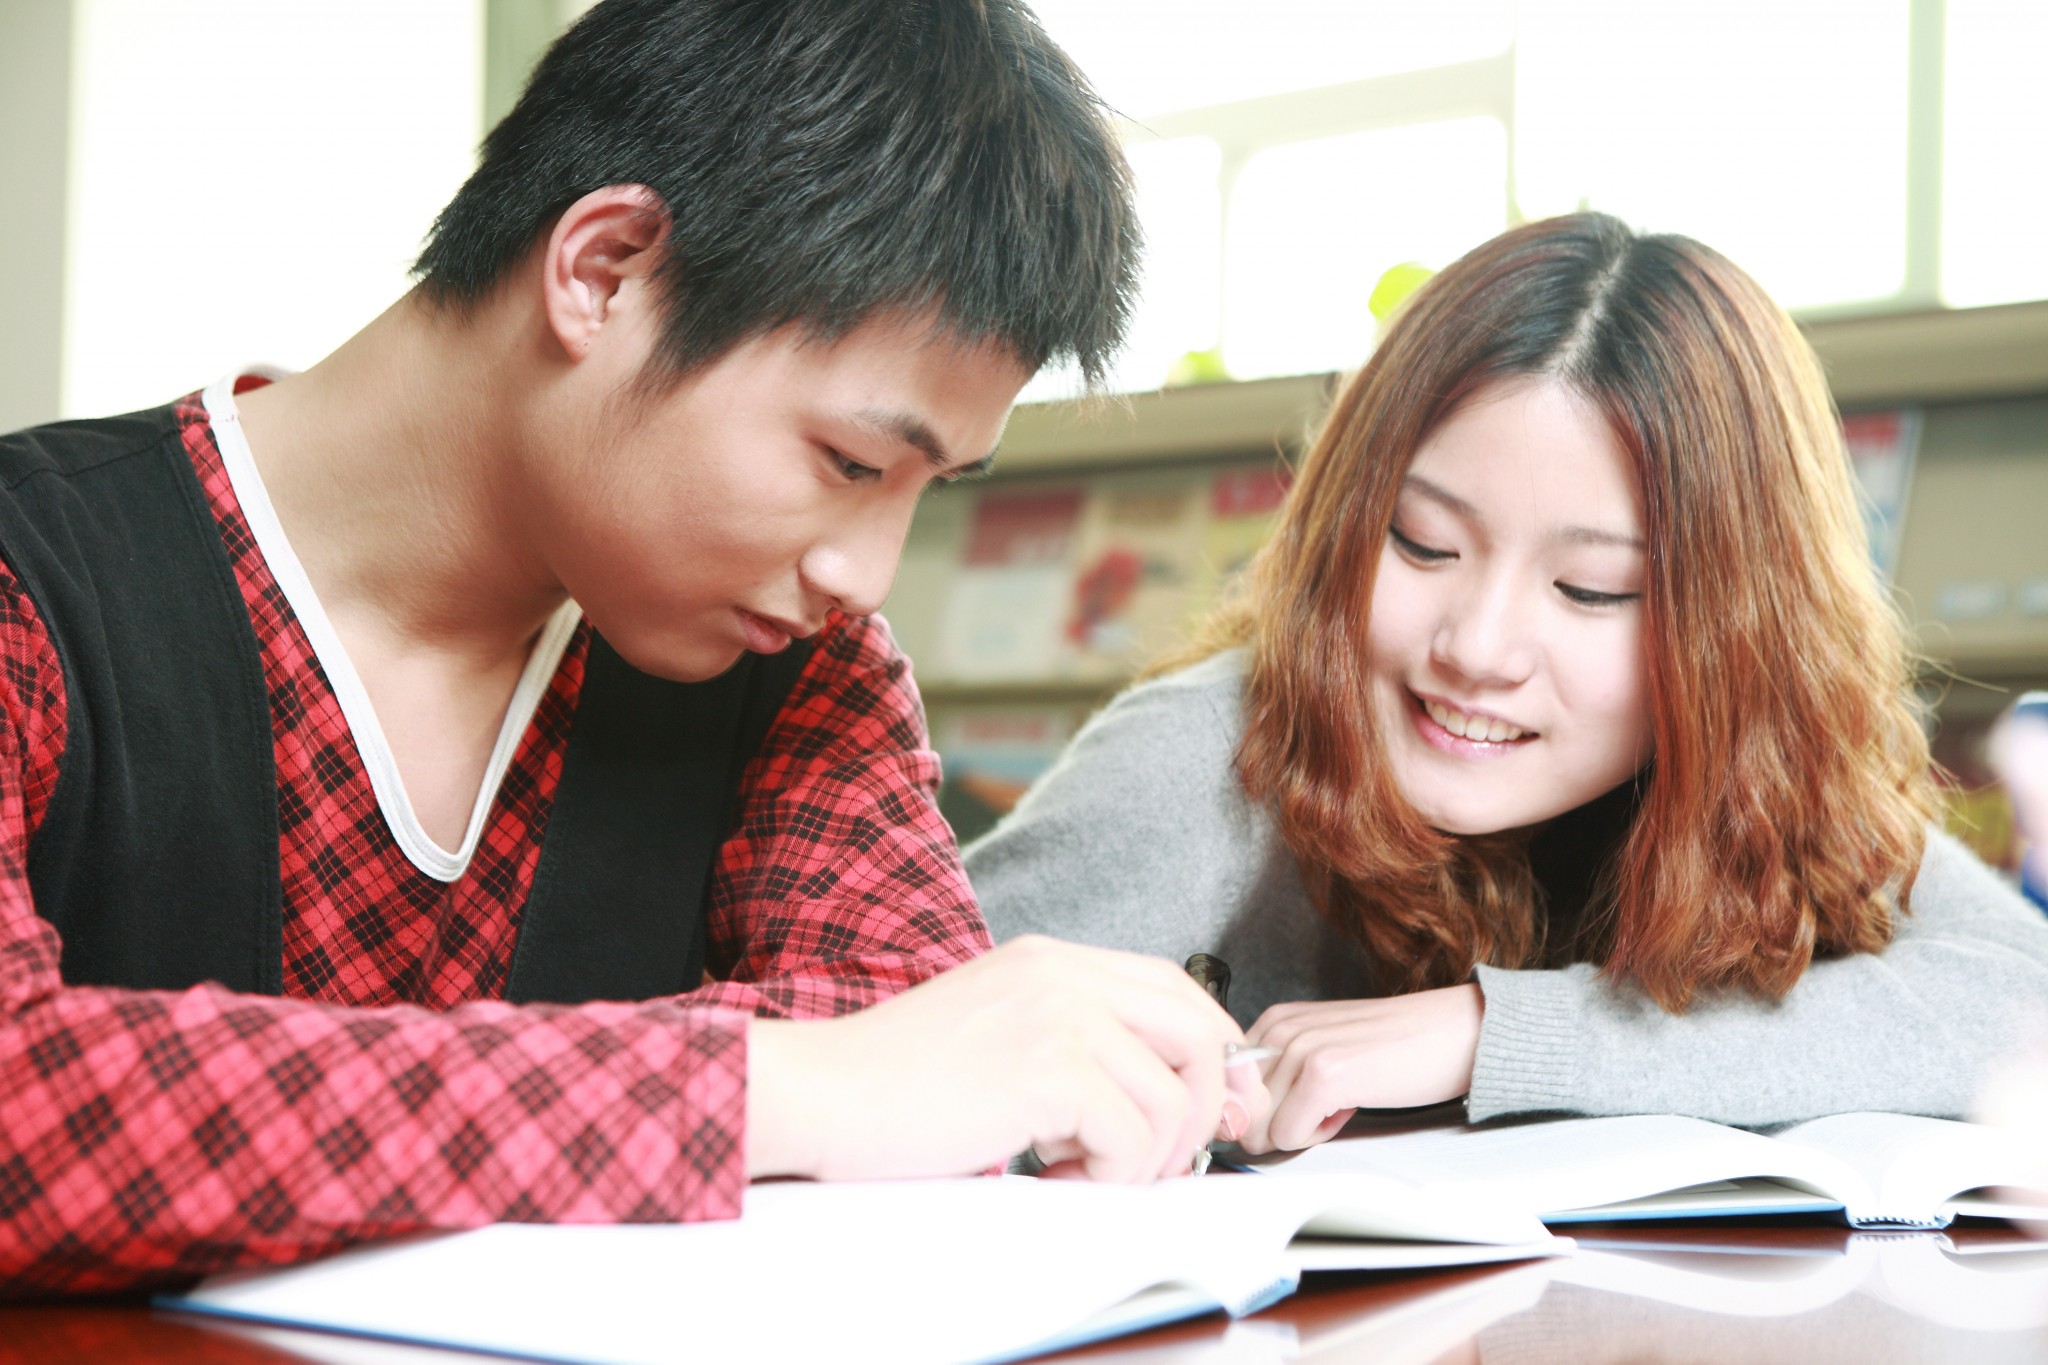 How to prepare for your IELTS exam